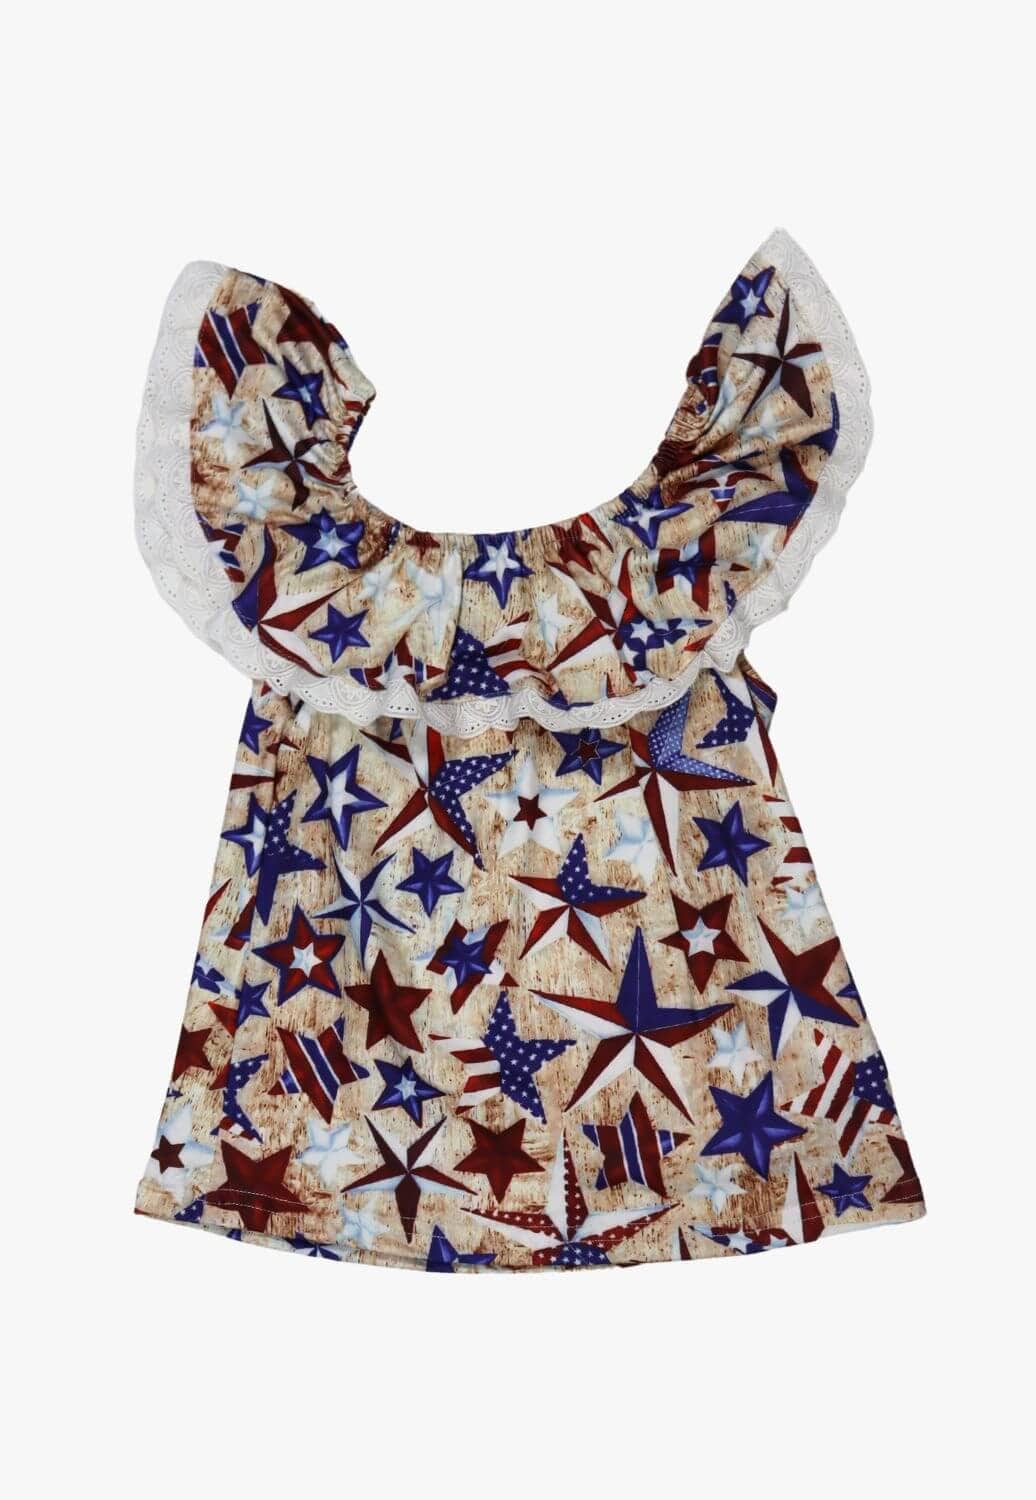 Shea Baby CLOTHING-Infants Shea Baby Star Lace Top